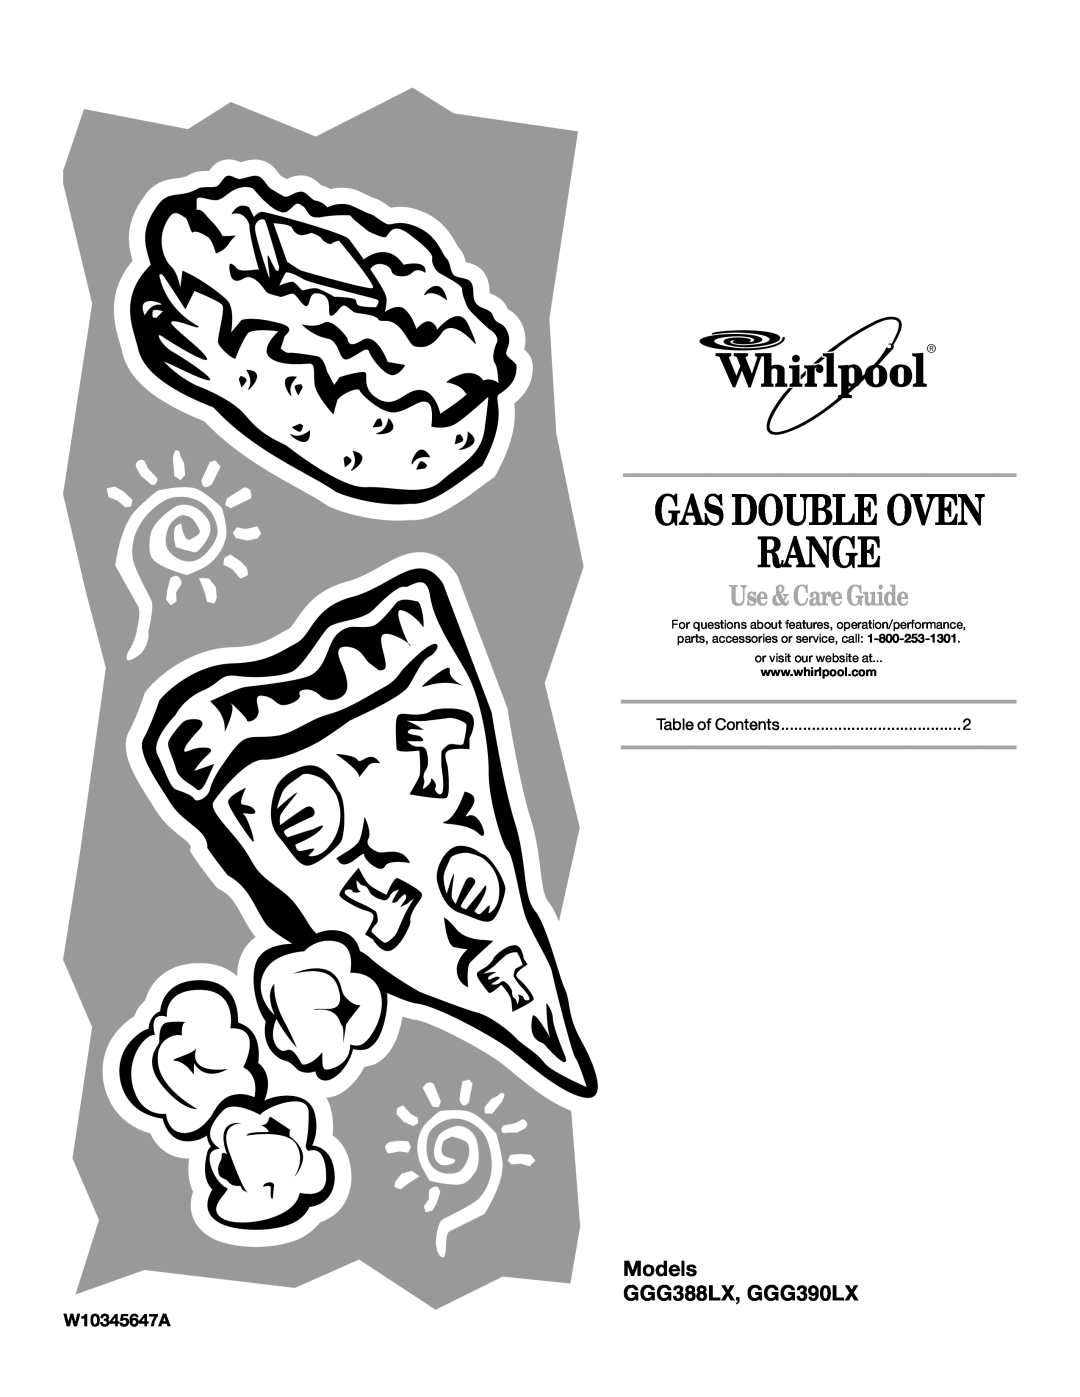 Whirlpool GGG388LX, GGG390LX manual Gas Double Oven Range, Use & Care Guide, Models, W10432286B, or visit our website at 